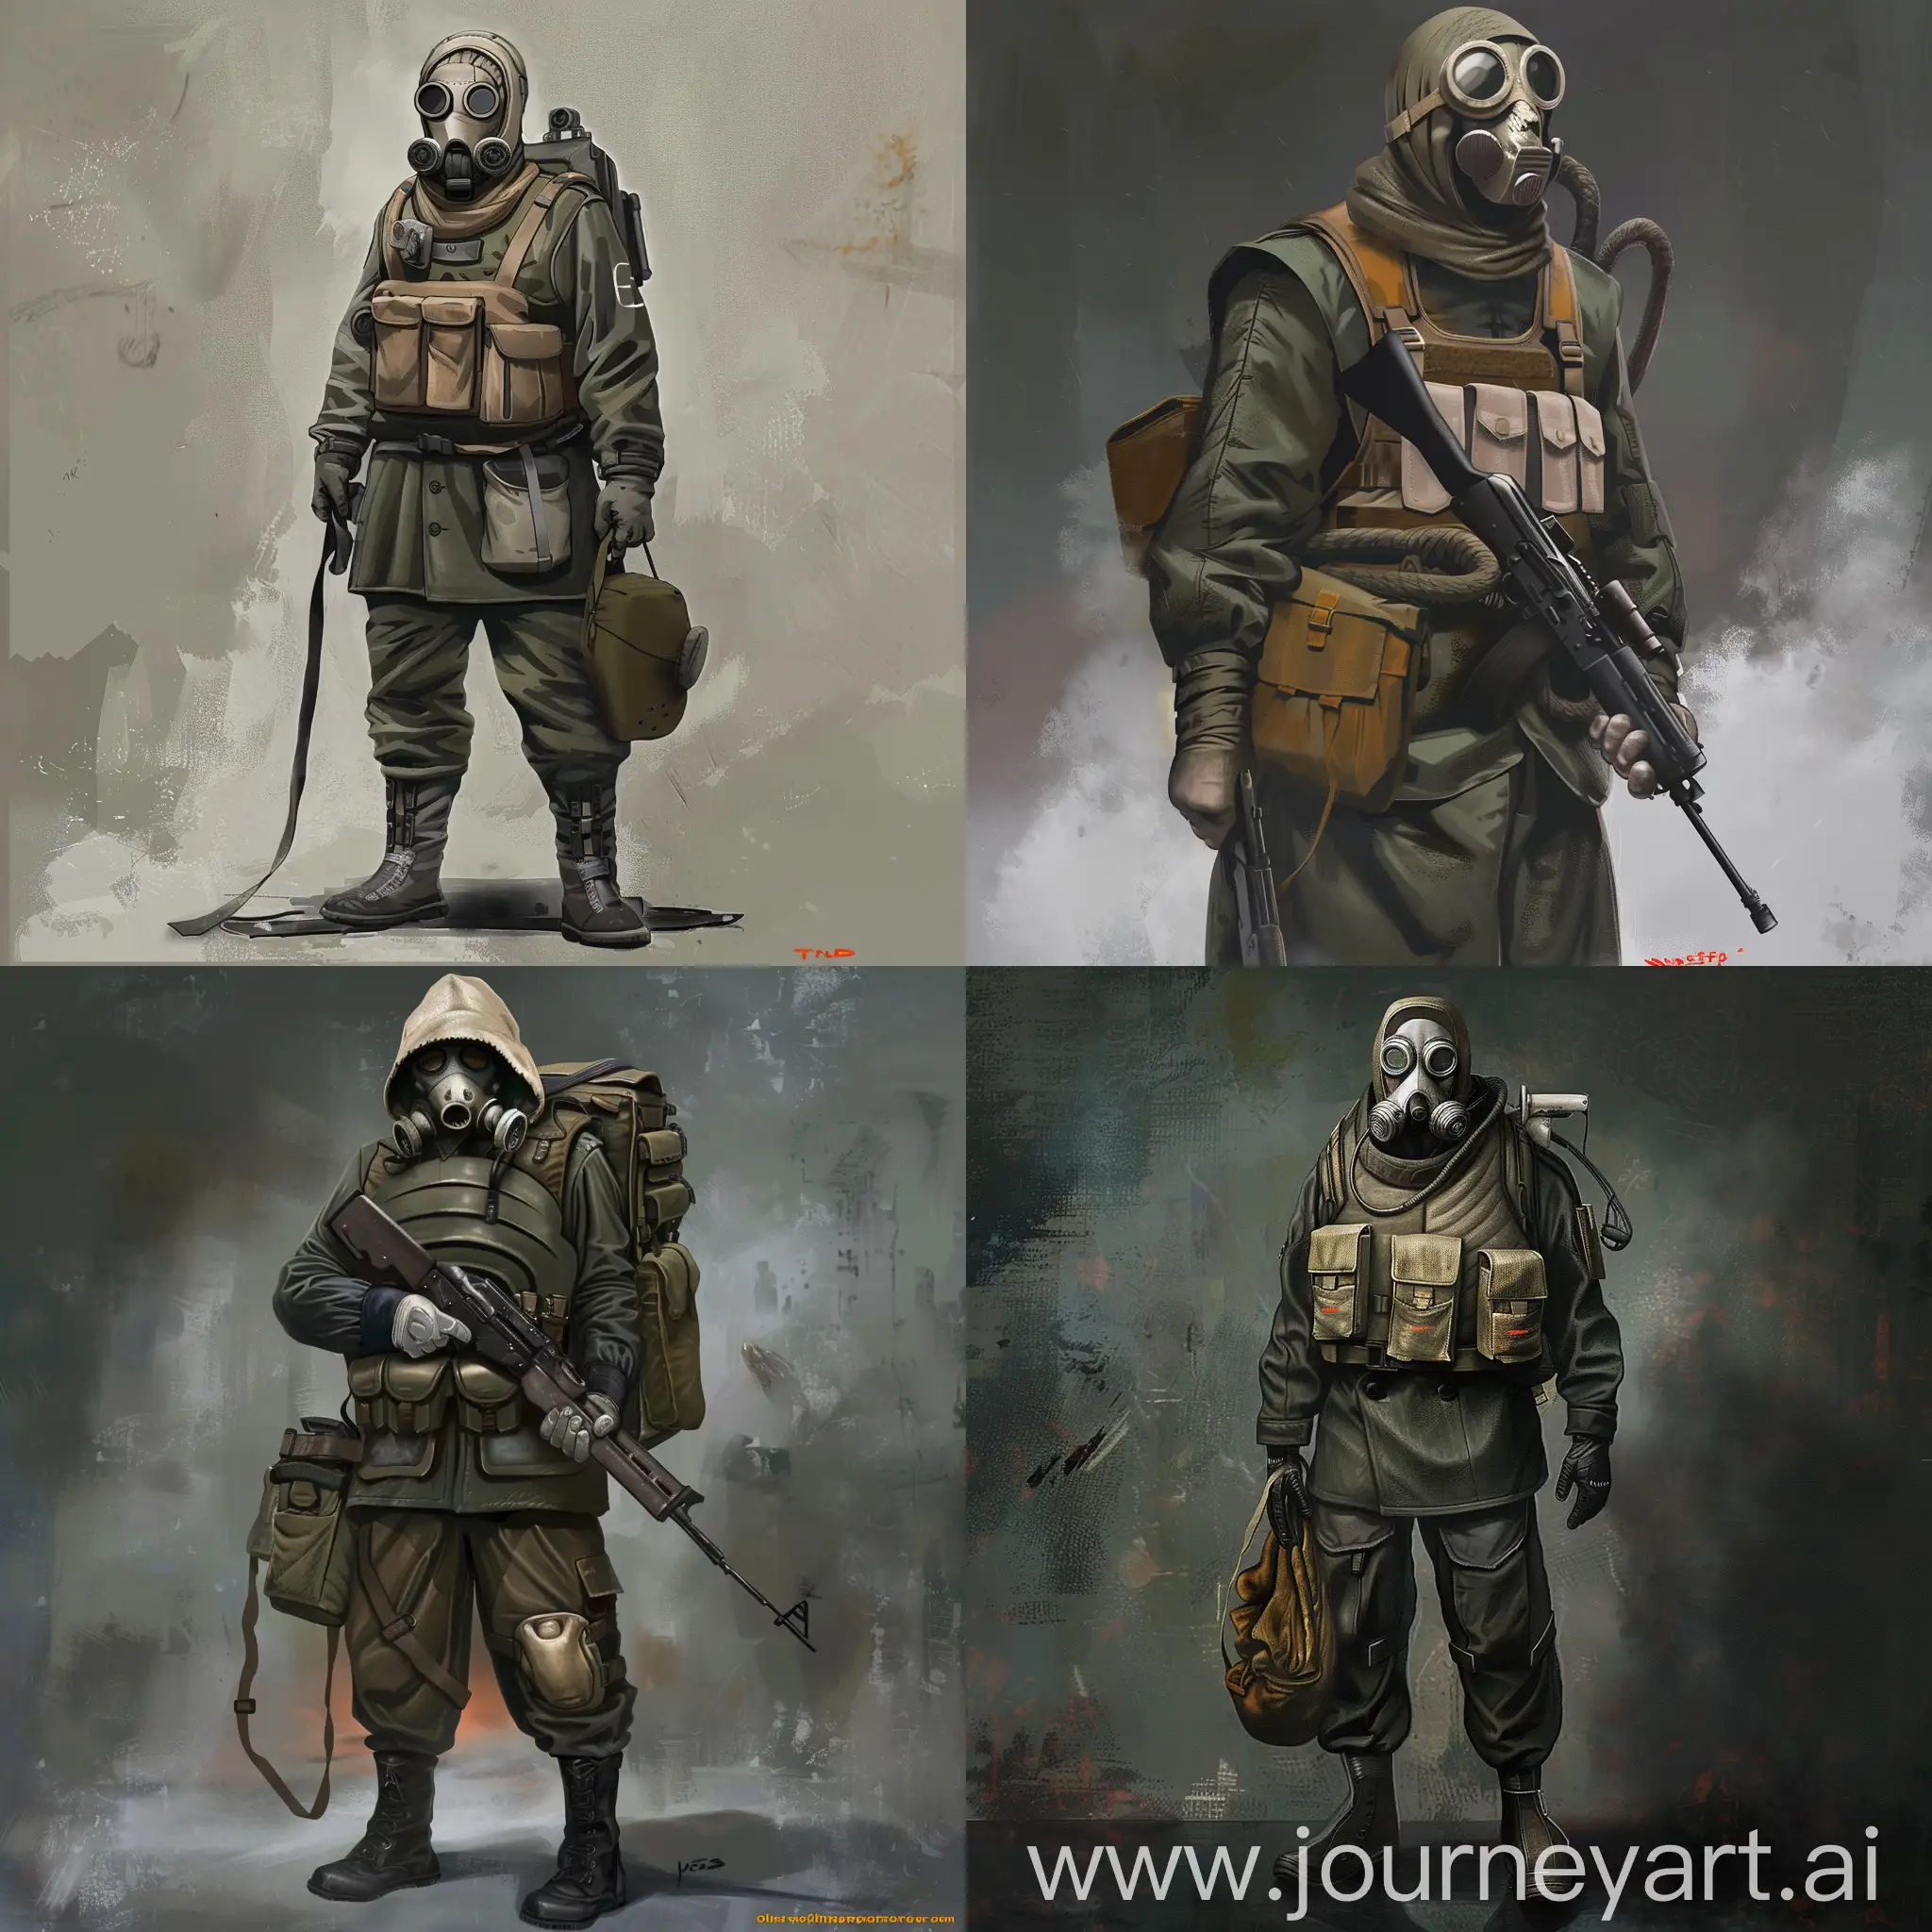 Concept art of the Hansa faction soldier from the Metro 2033 game